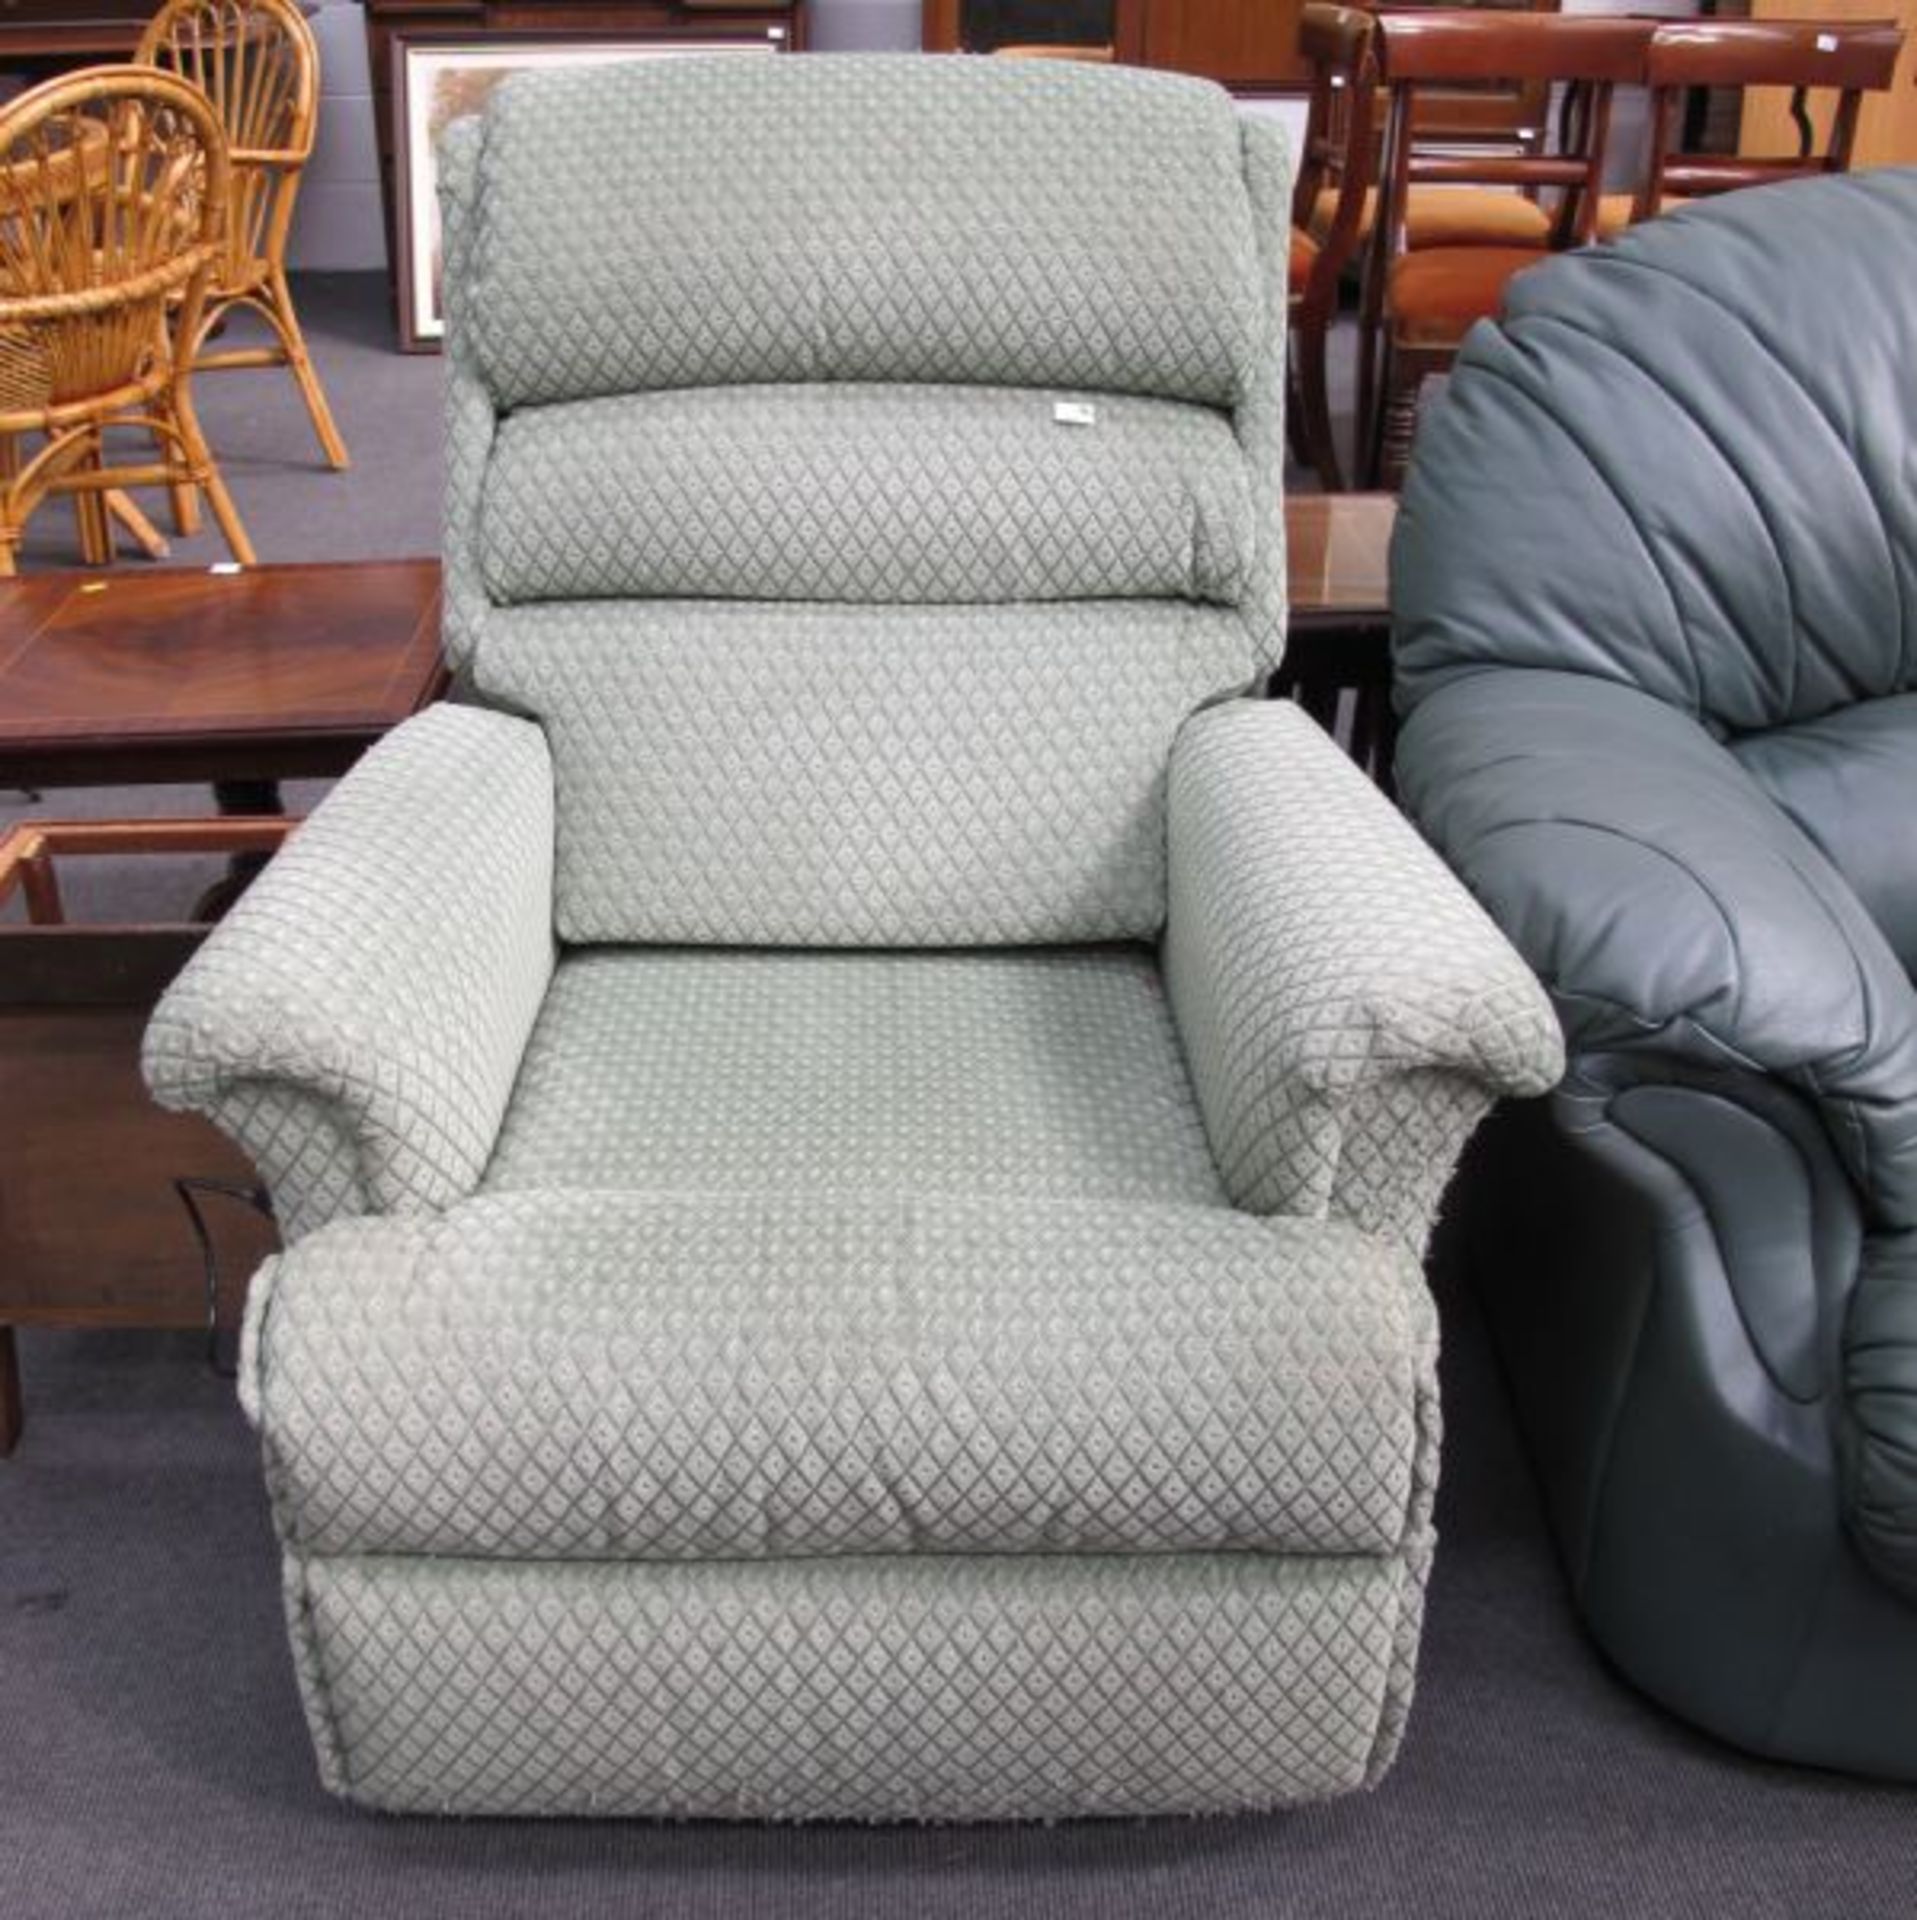 A Green Upholstered Electrically Operated Armchair, spares or repair (est. £50-£100)